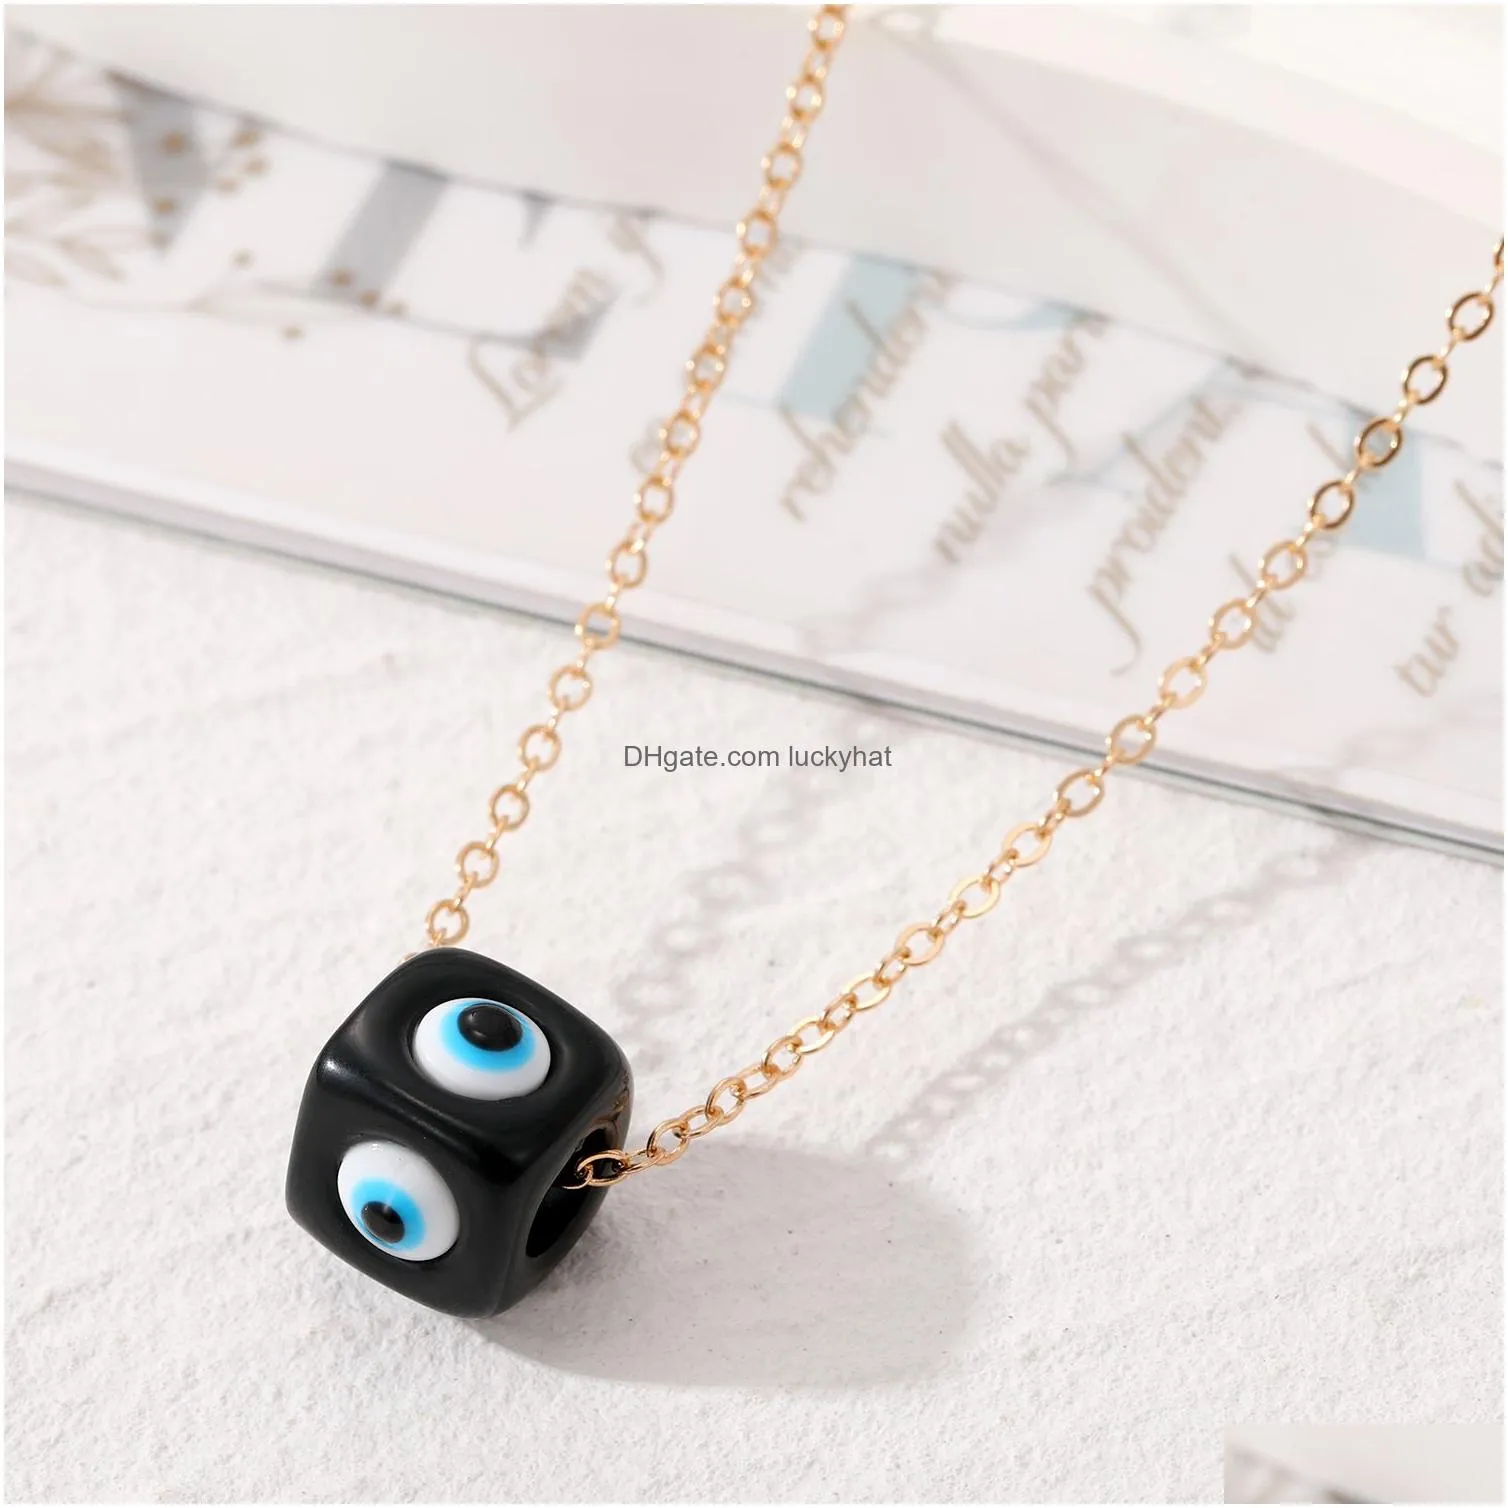 resin square evil eye bead pendant necklaces for women blue eyes necklace